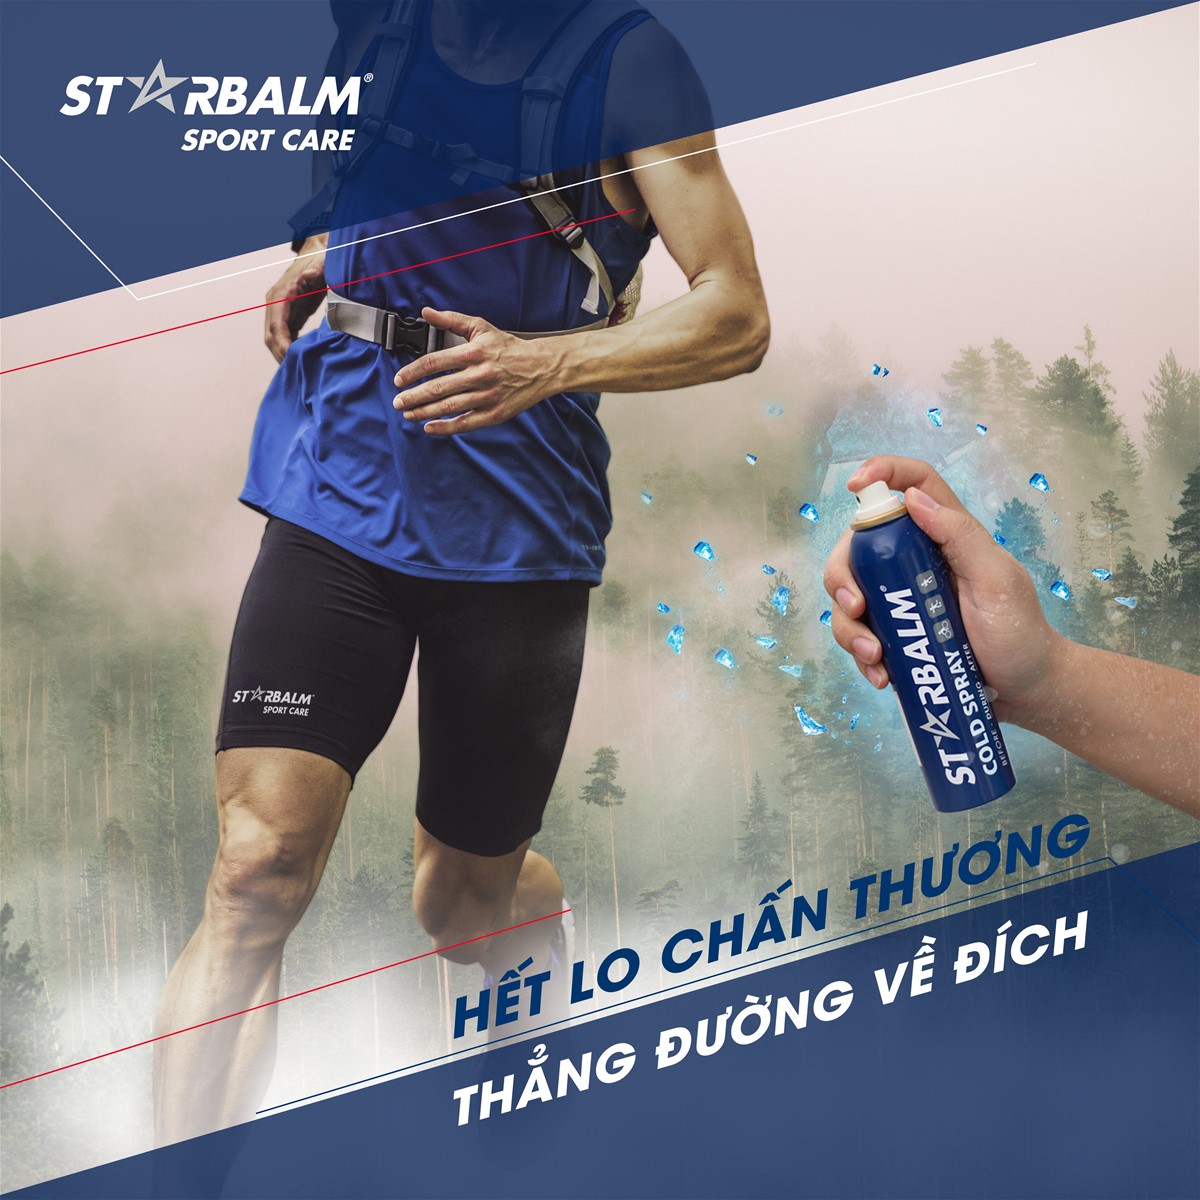 Conquering Halong Bay Heritage Marathon 2020, Don't Forget STARBALM